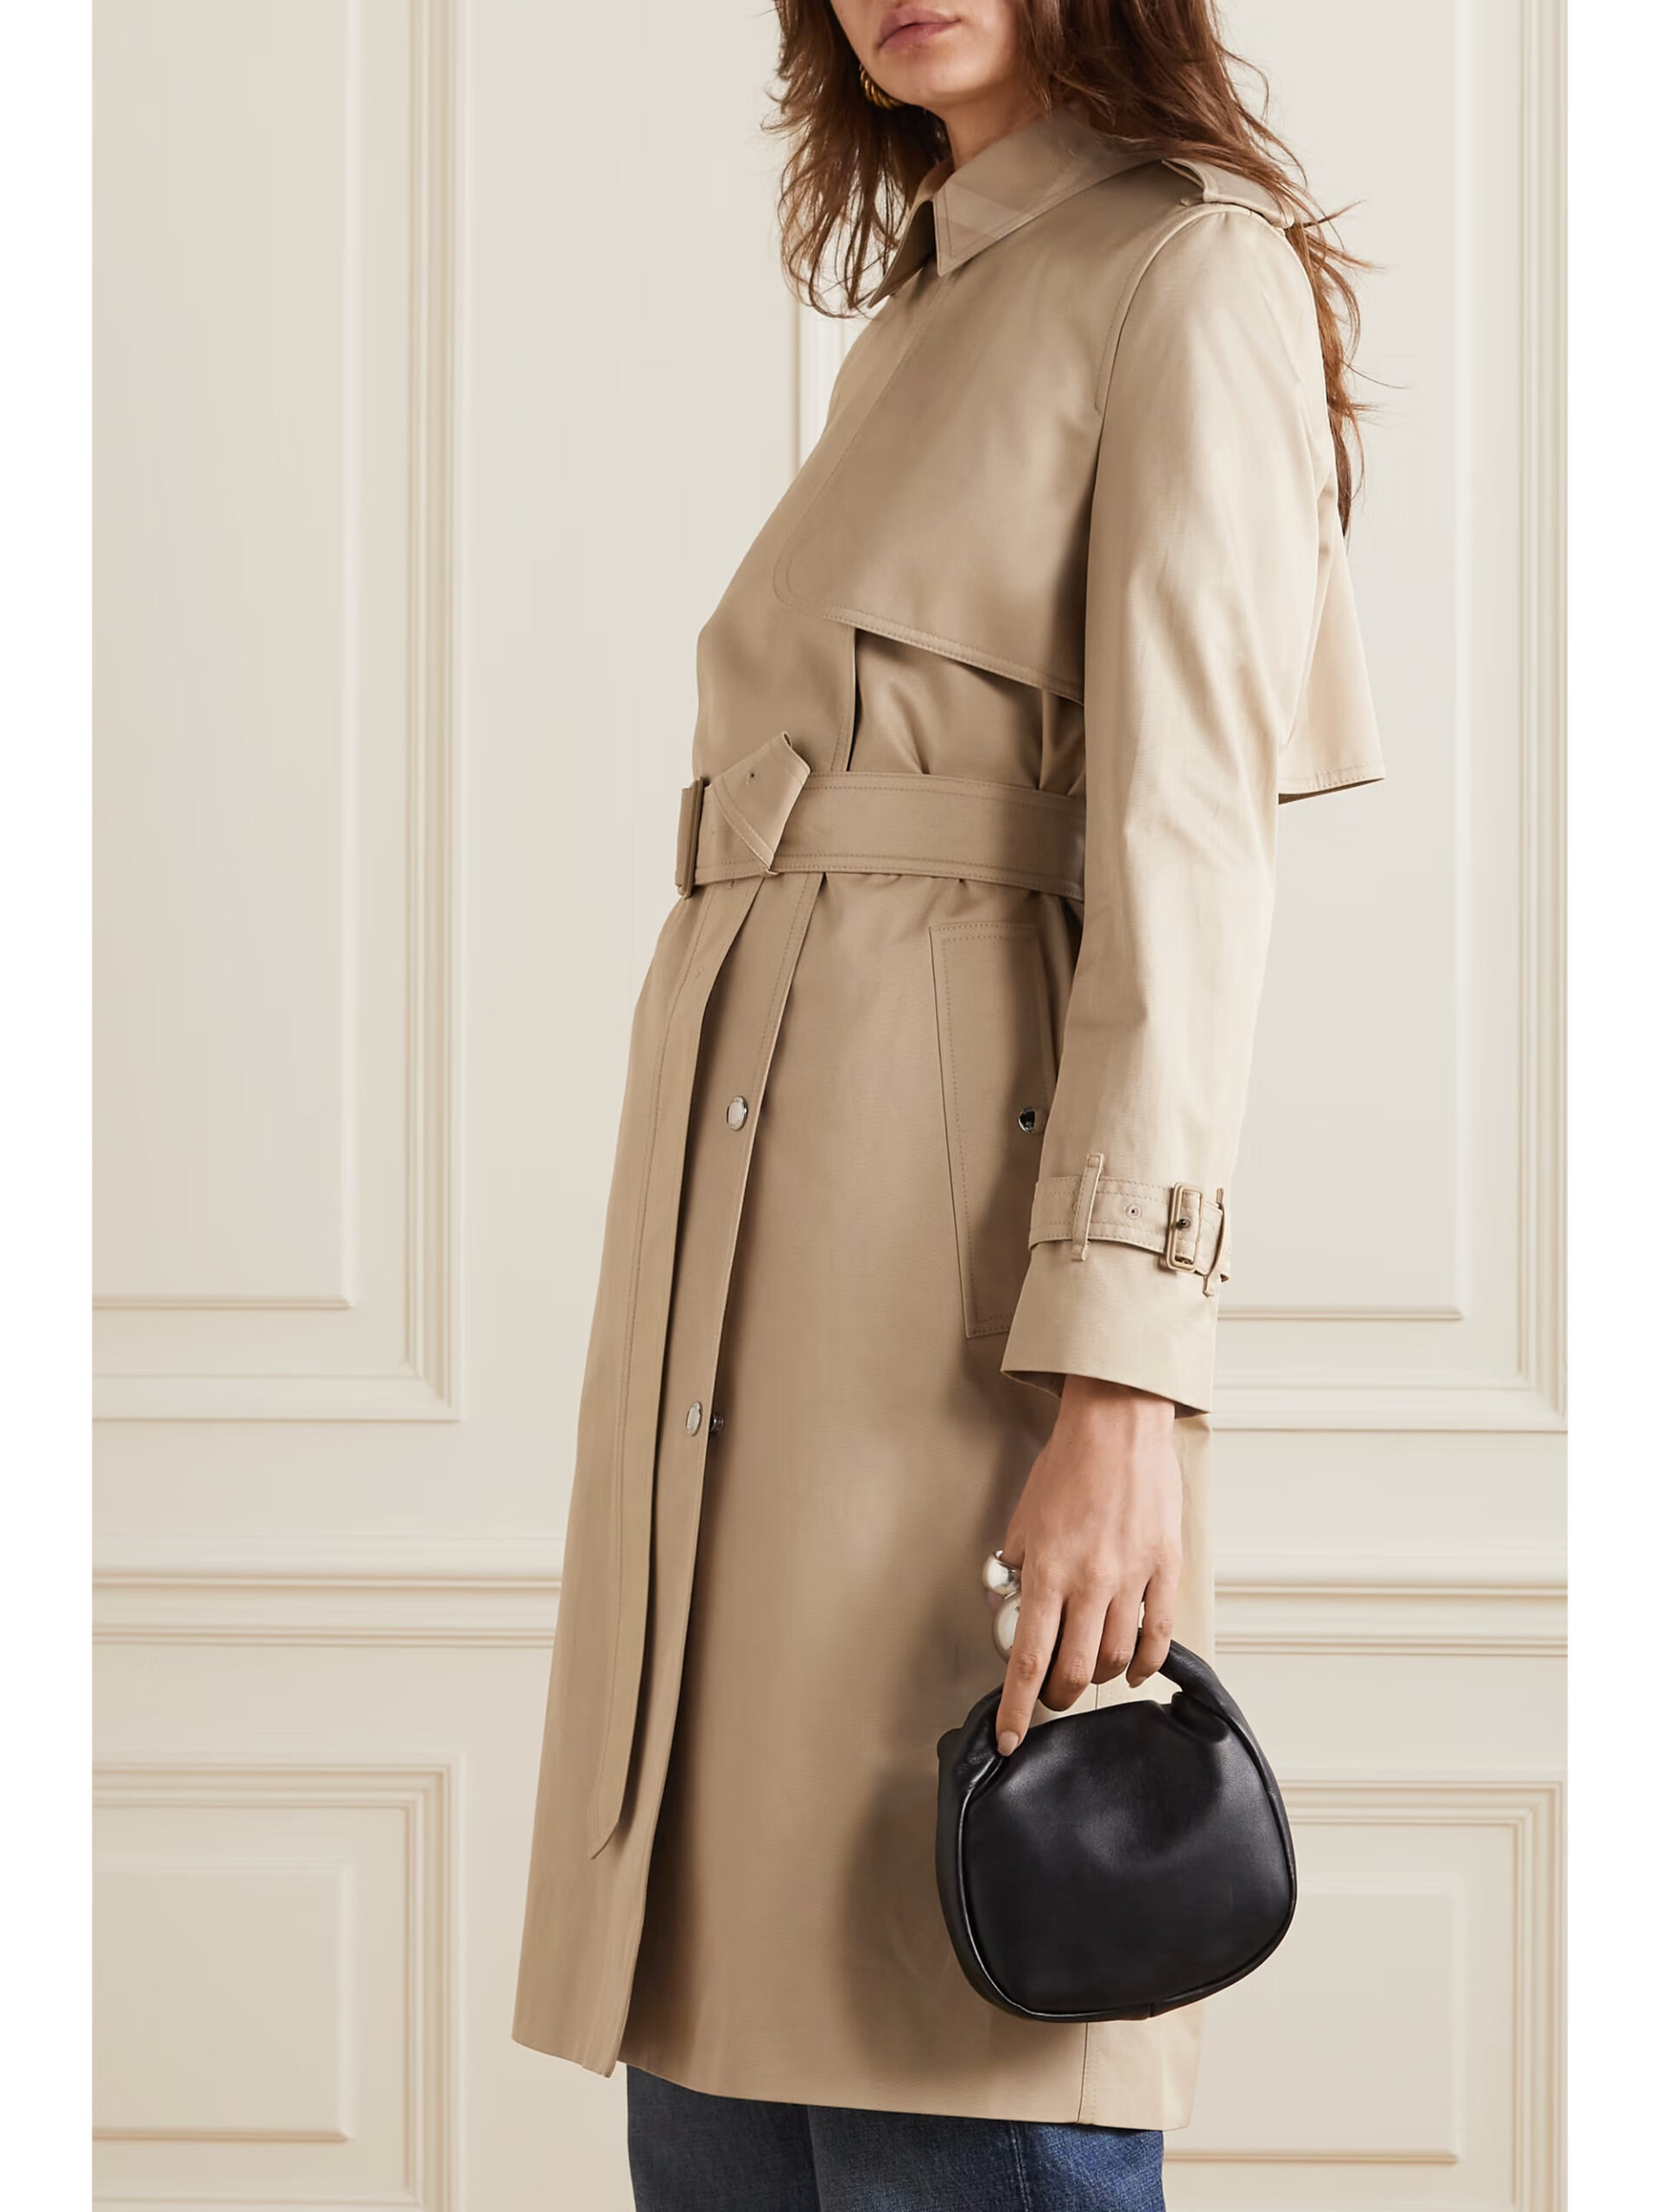 A woman stands side-on showcasing a BURBERRY Sandridge belted cotton-gabardine trench coat in a neutral shade. The coat's tailored silhouette is accentuated by a cinched waist belt and structured shoulders, complemented by a dark handheld bag, hinting at a blend of classic style with modern elegance.